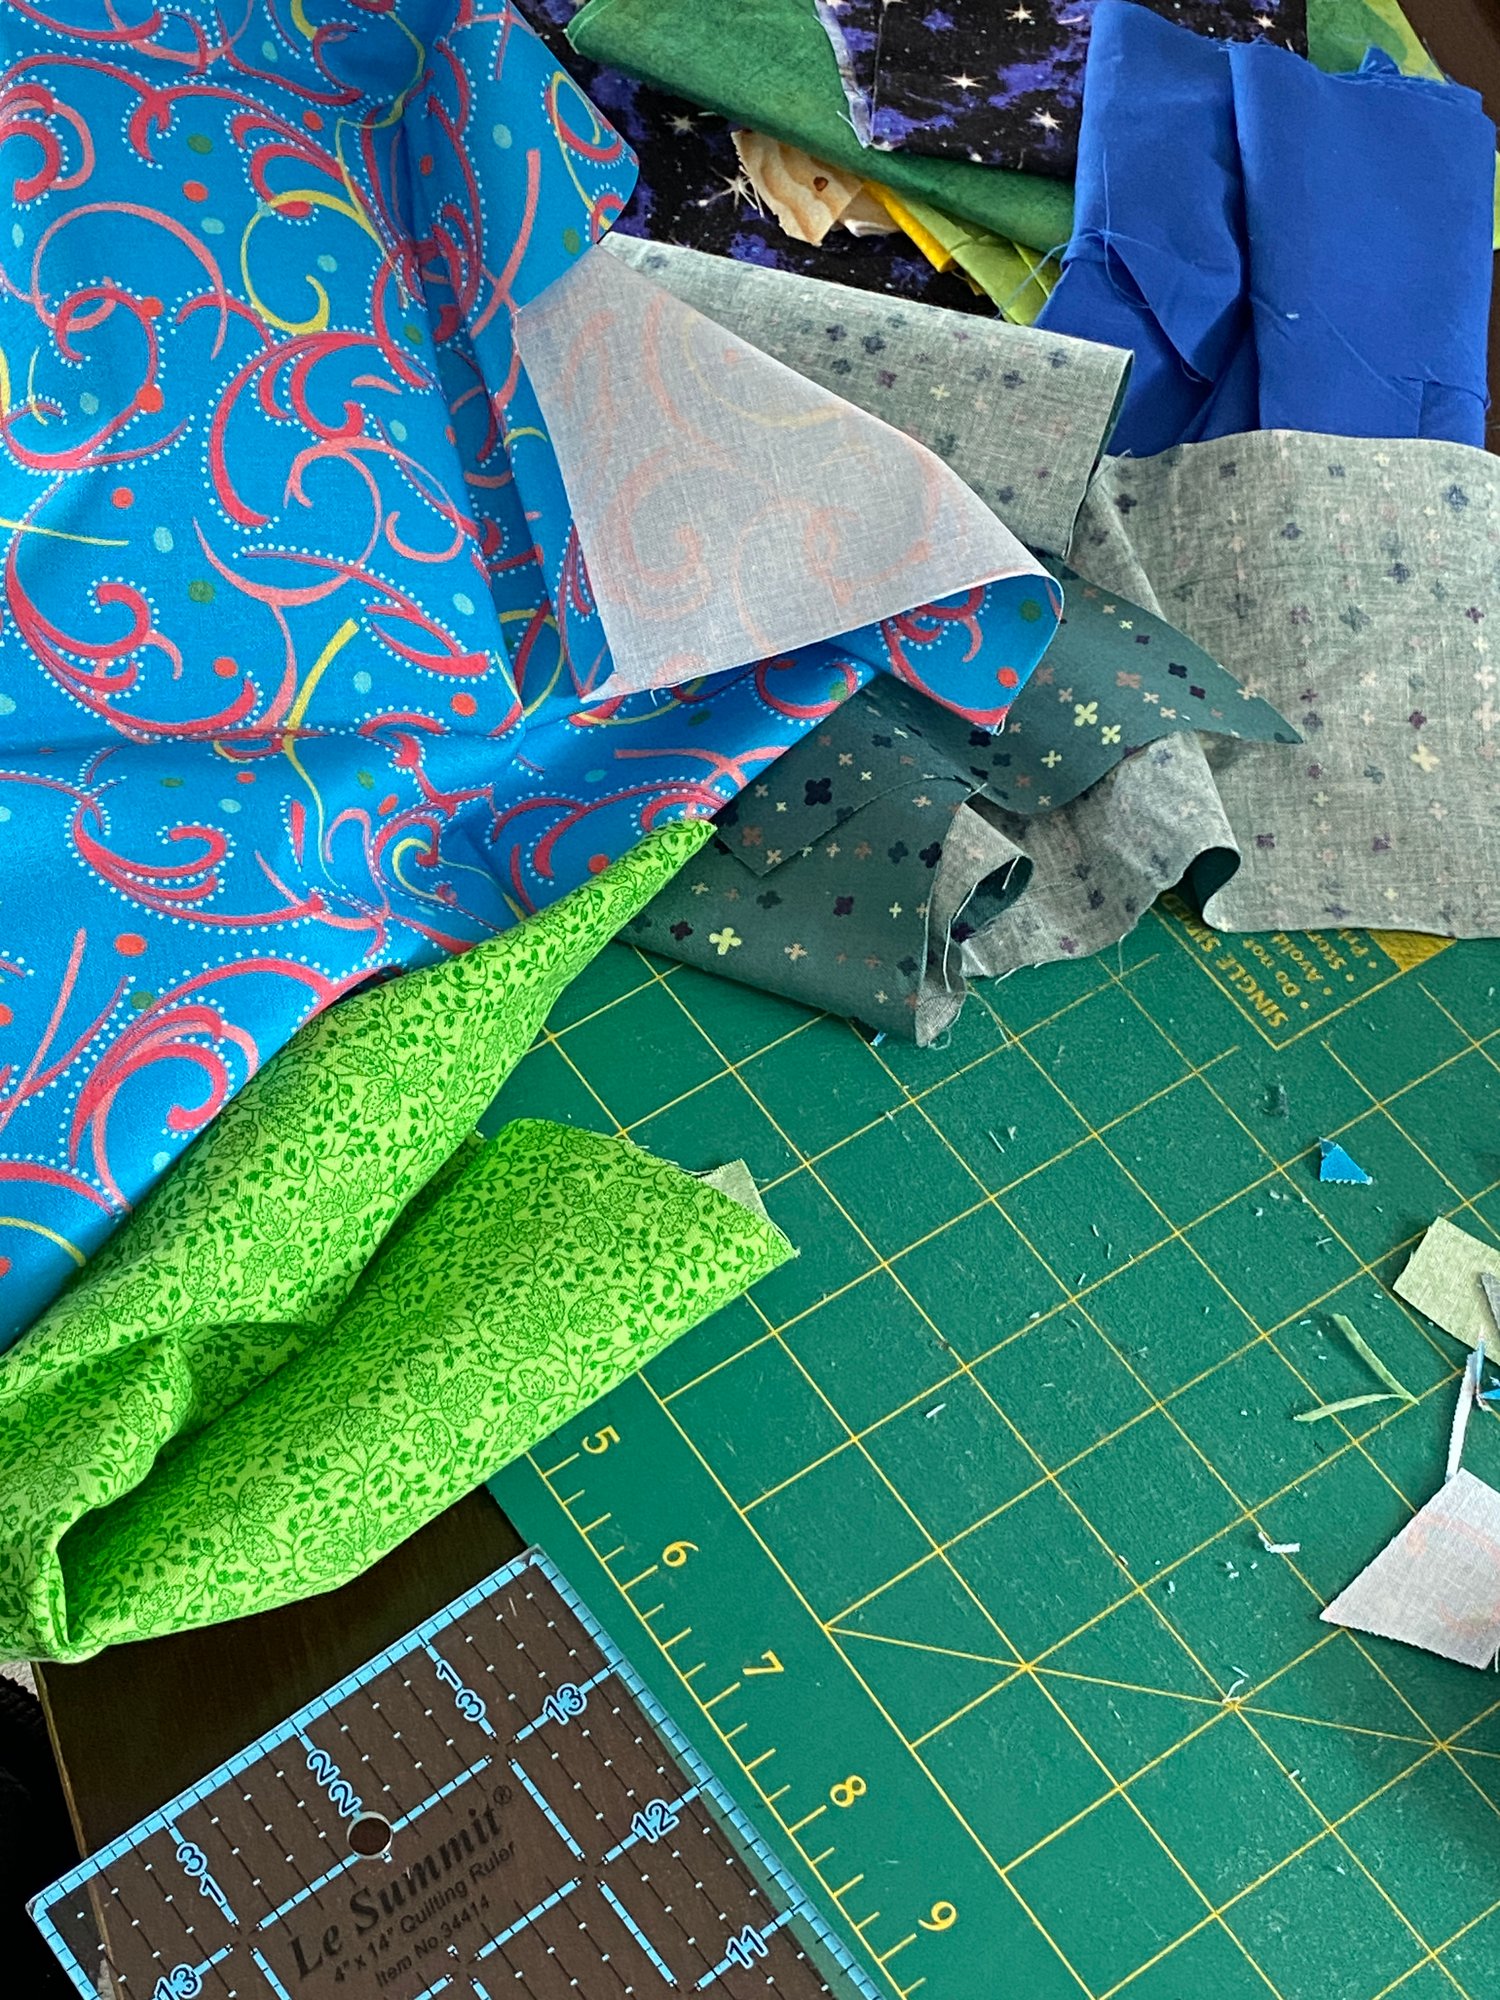 After a mad dash to my local fabric store, Thimbles and Threads in Upper Hutt, I found this blue fabric with colourful squiggly lines on it. It appears to be from the same fabric collection as the confetti fabric.